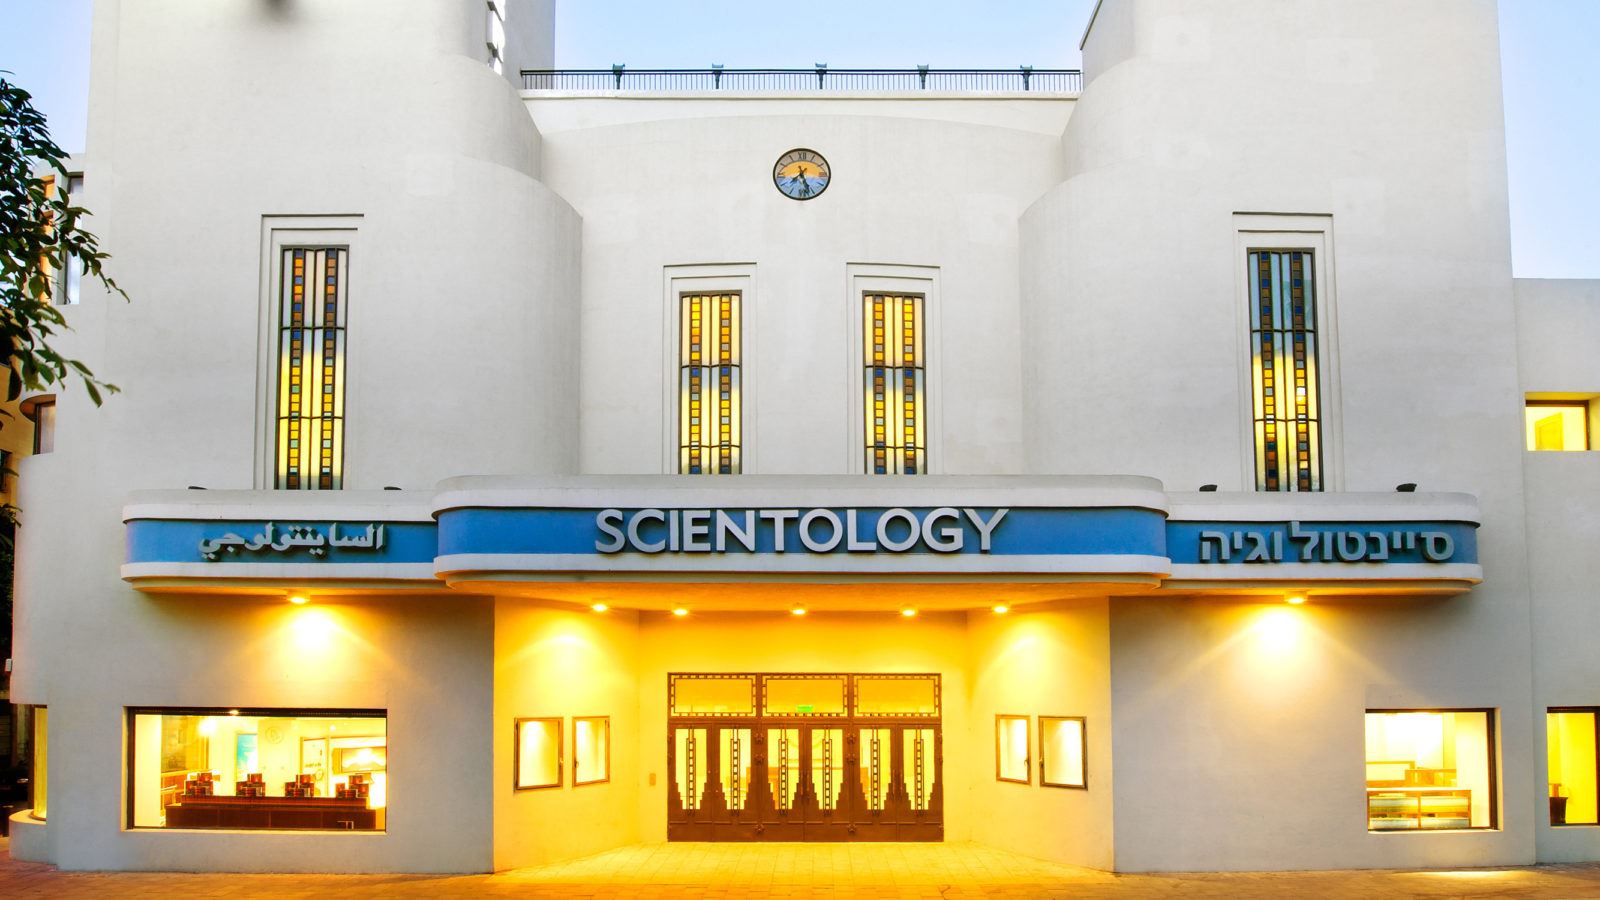 The Center of Scientology Israel